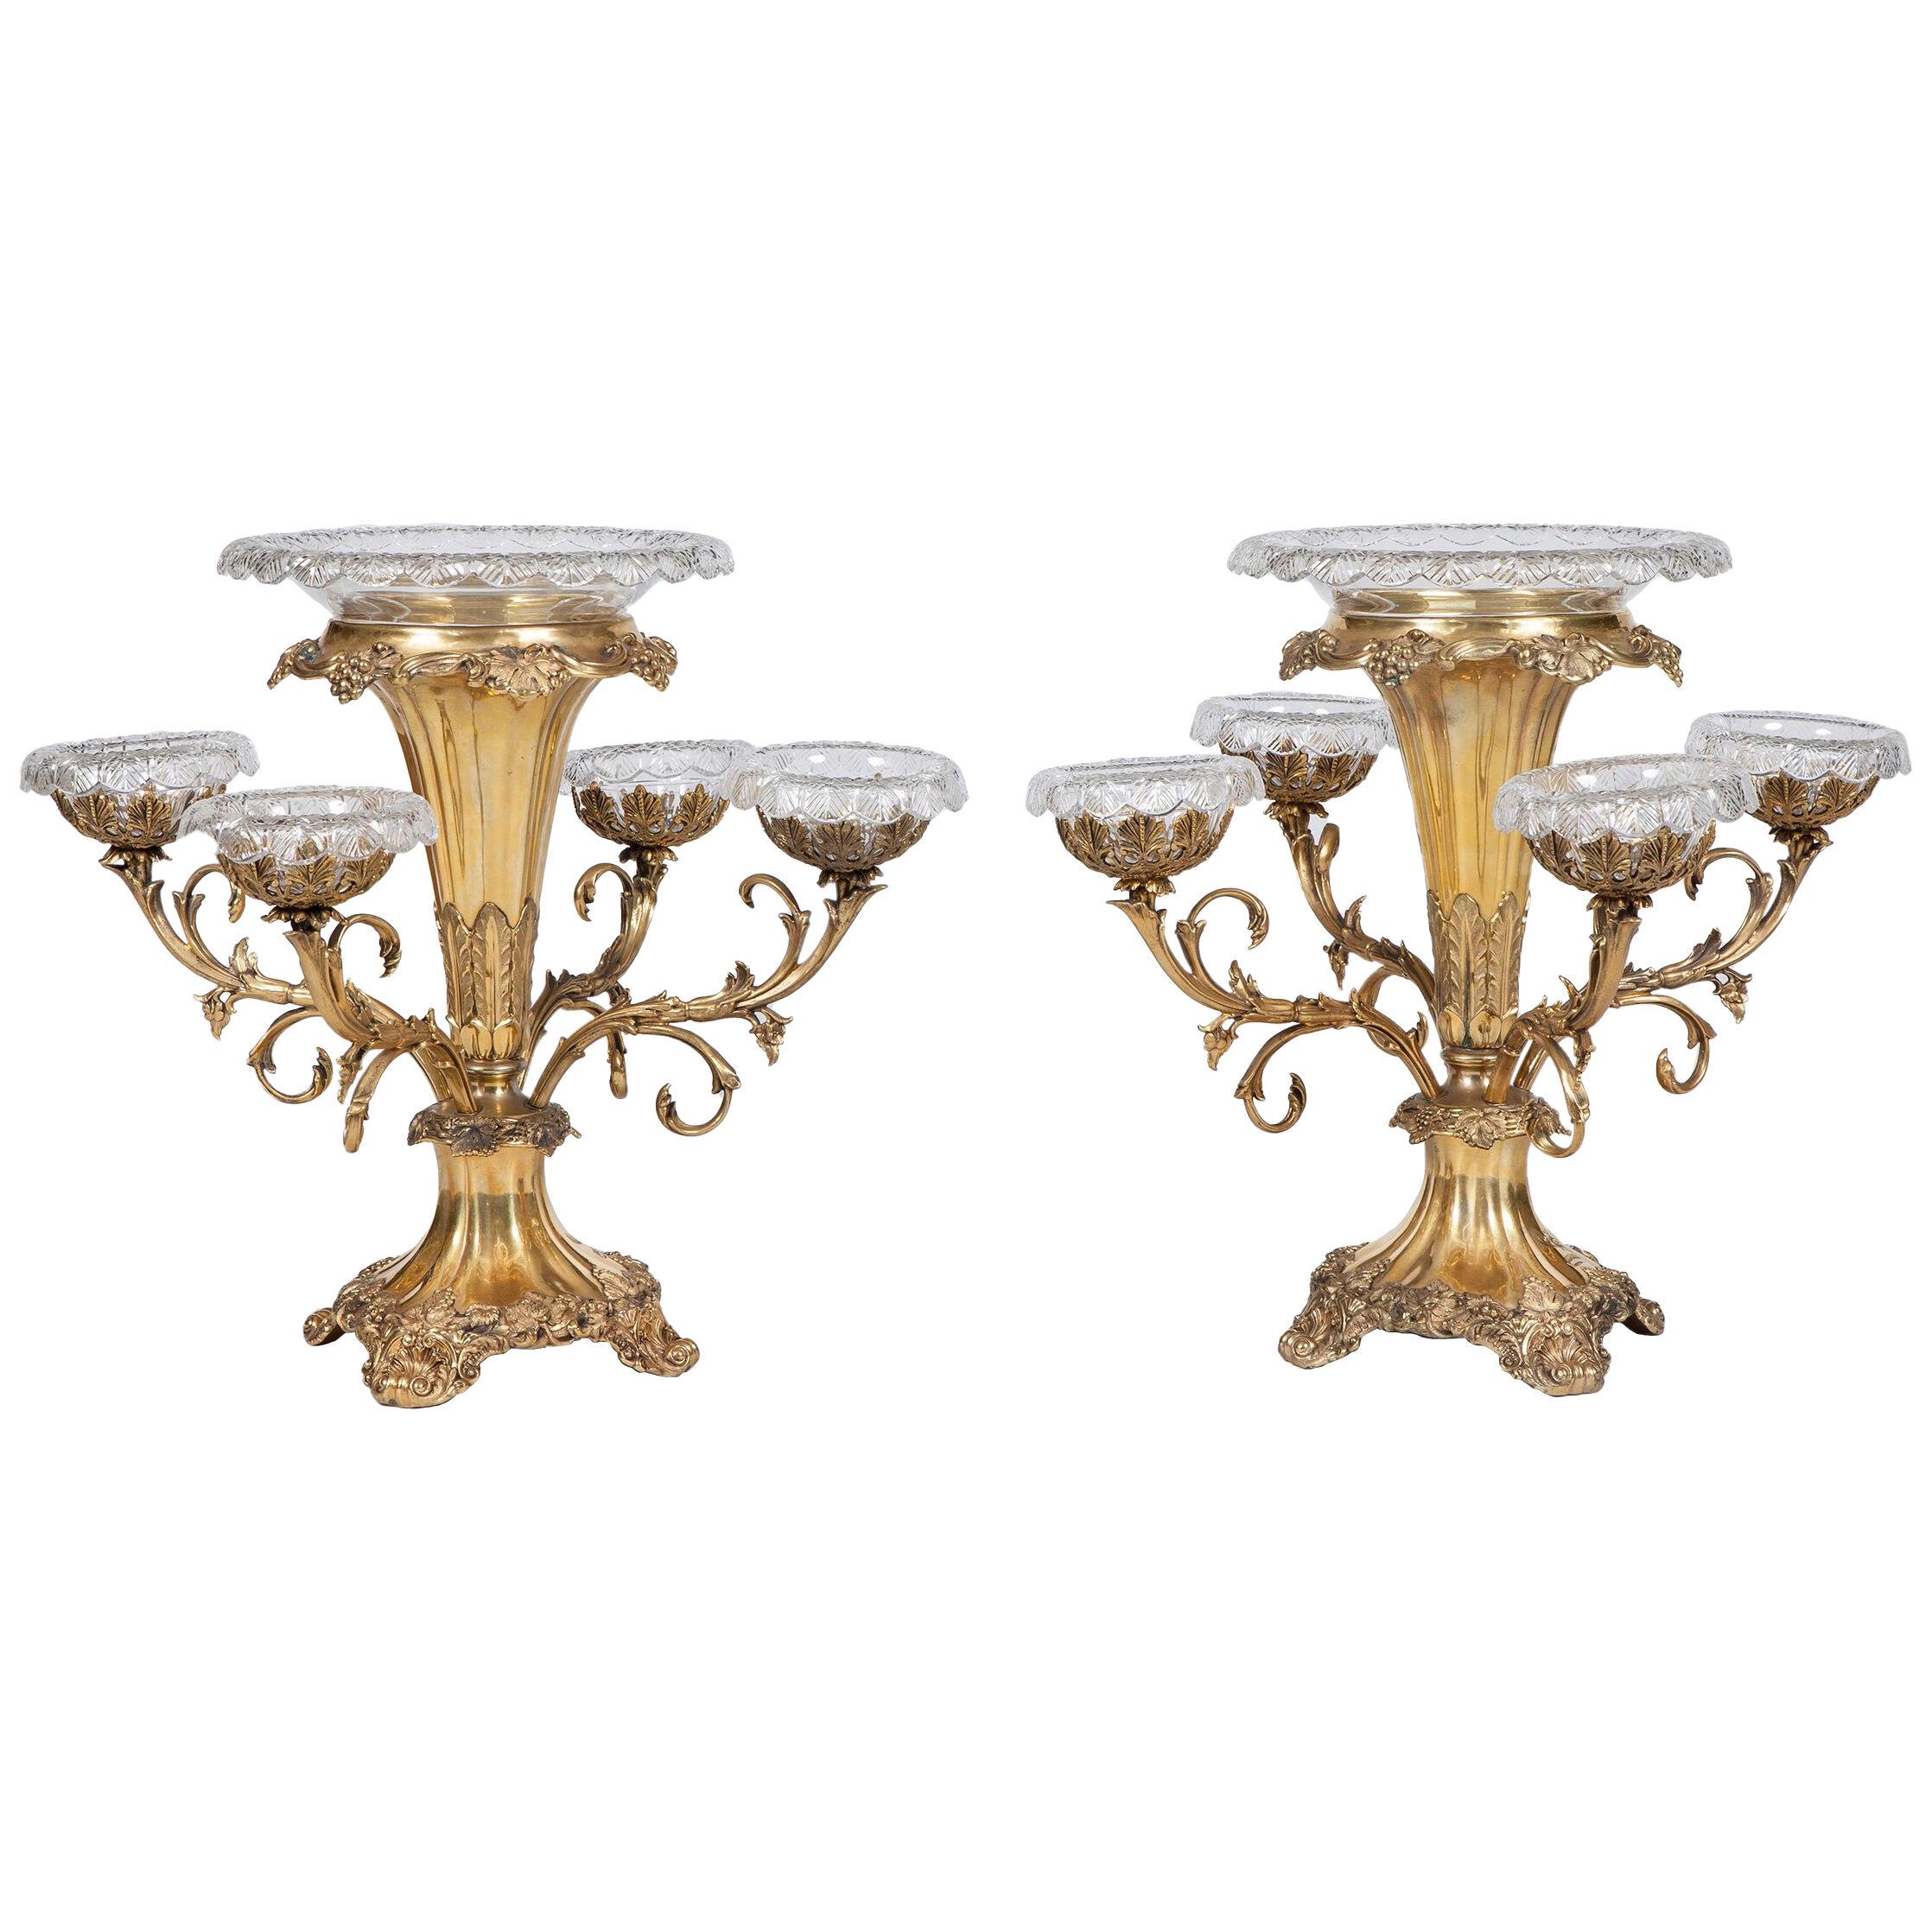 Pair of Victorian Silver Gilt Plated Centrepieces